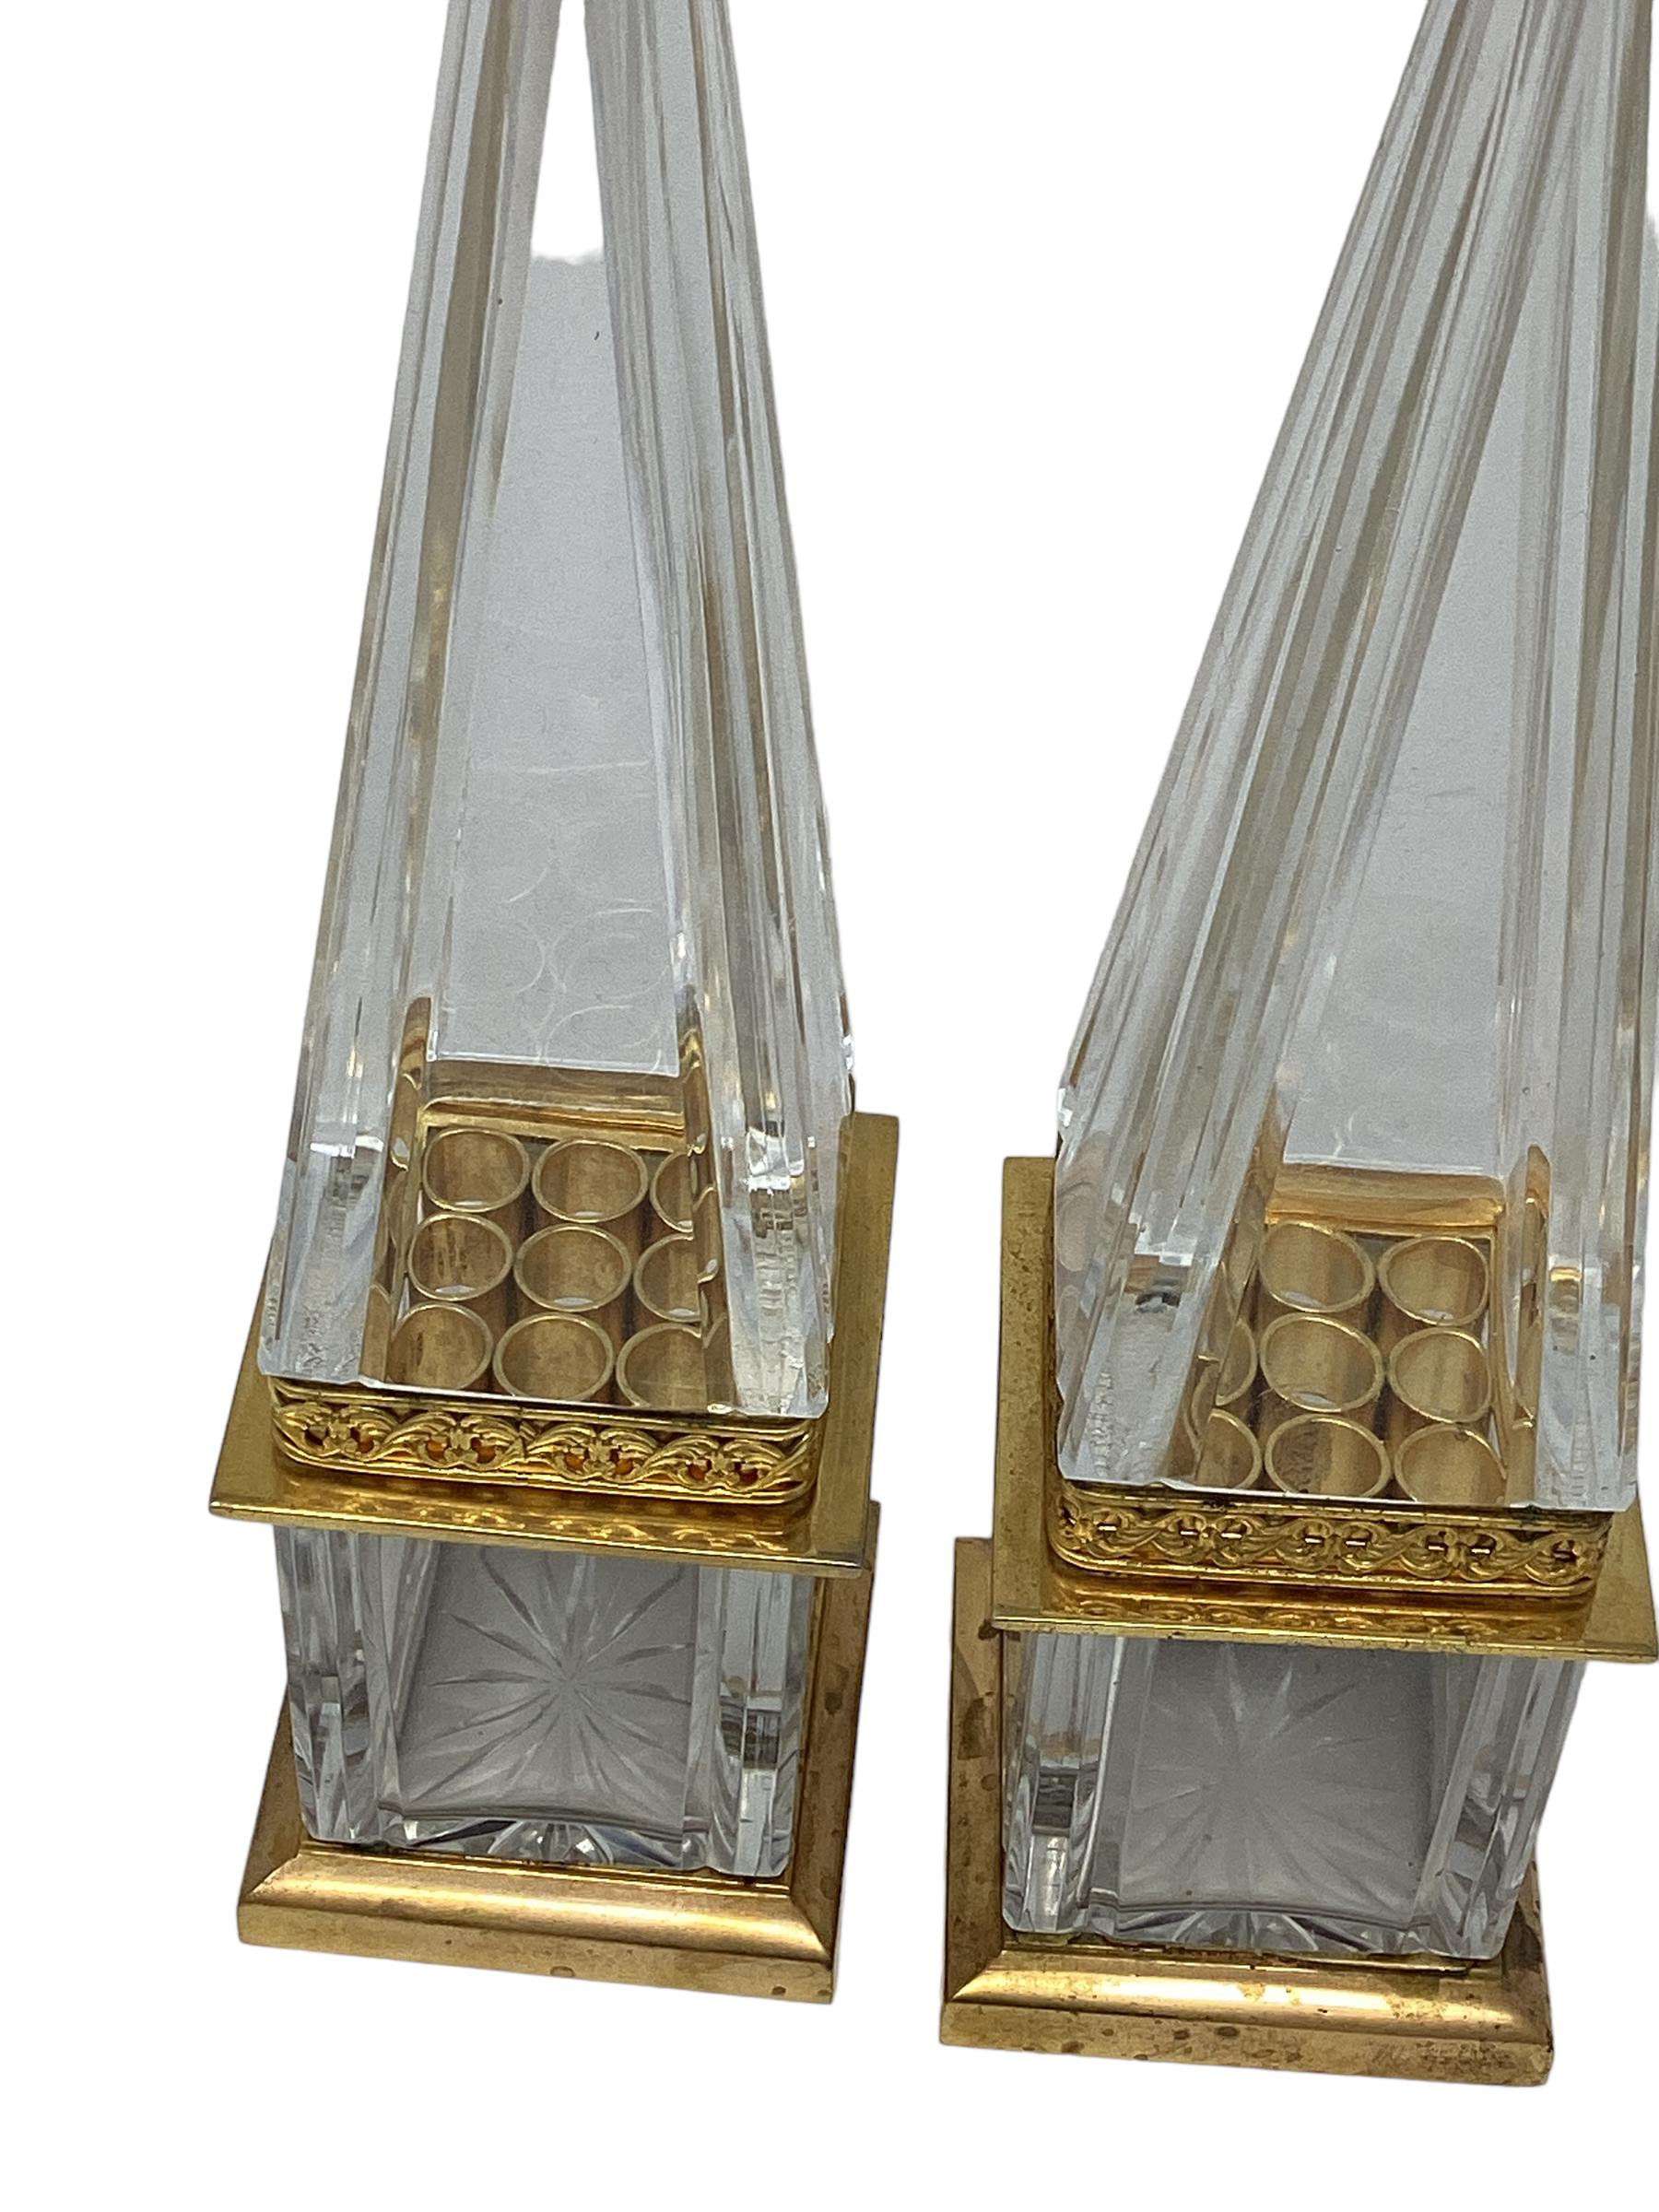 Pair of Vintage Crystal and Gilt Bronze Obelisks. The obelisk separate in the middle as part of the original design. These make a perfect accent on a table or a book shelf.